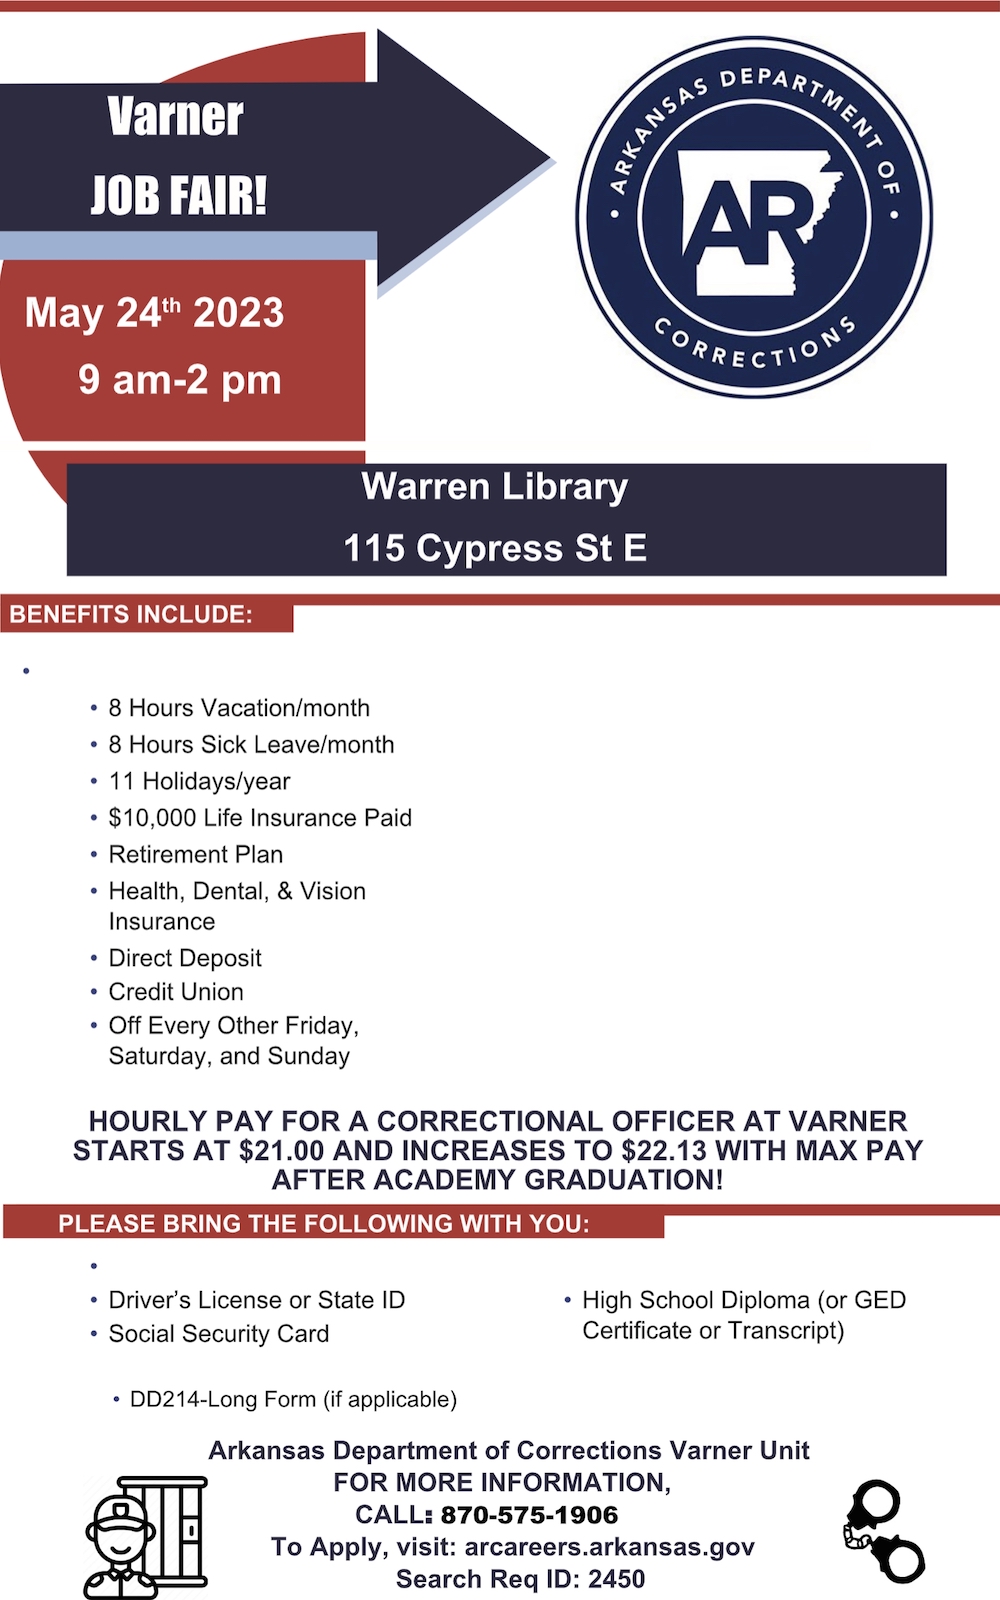 Job Fair coming May 24 to Warren Branch Library